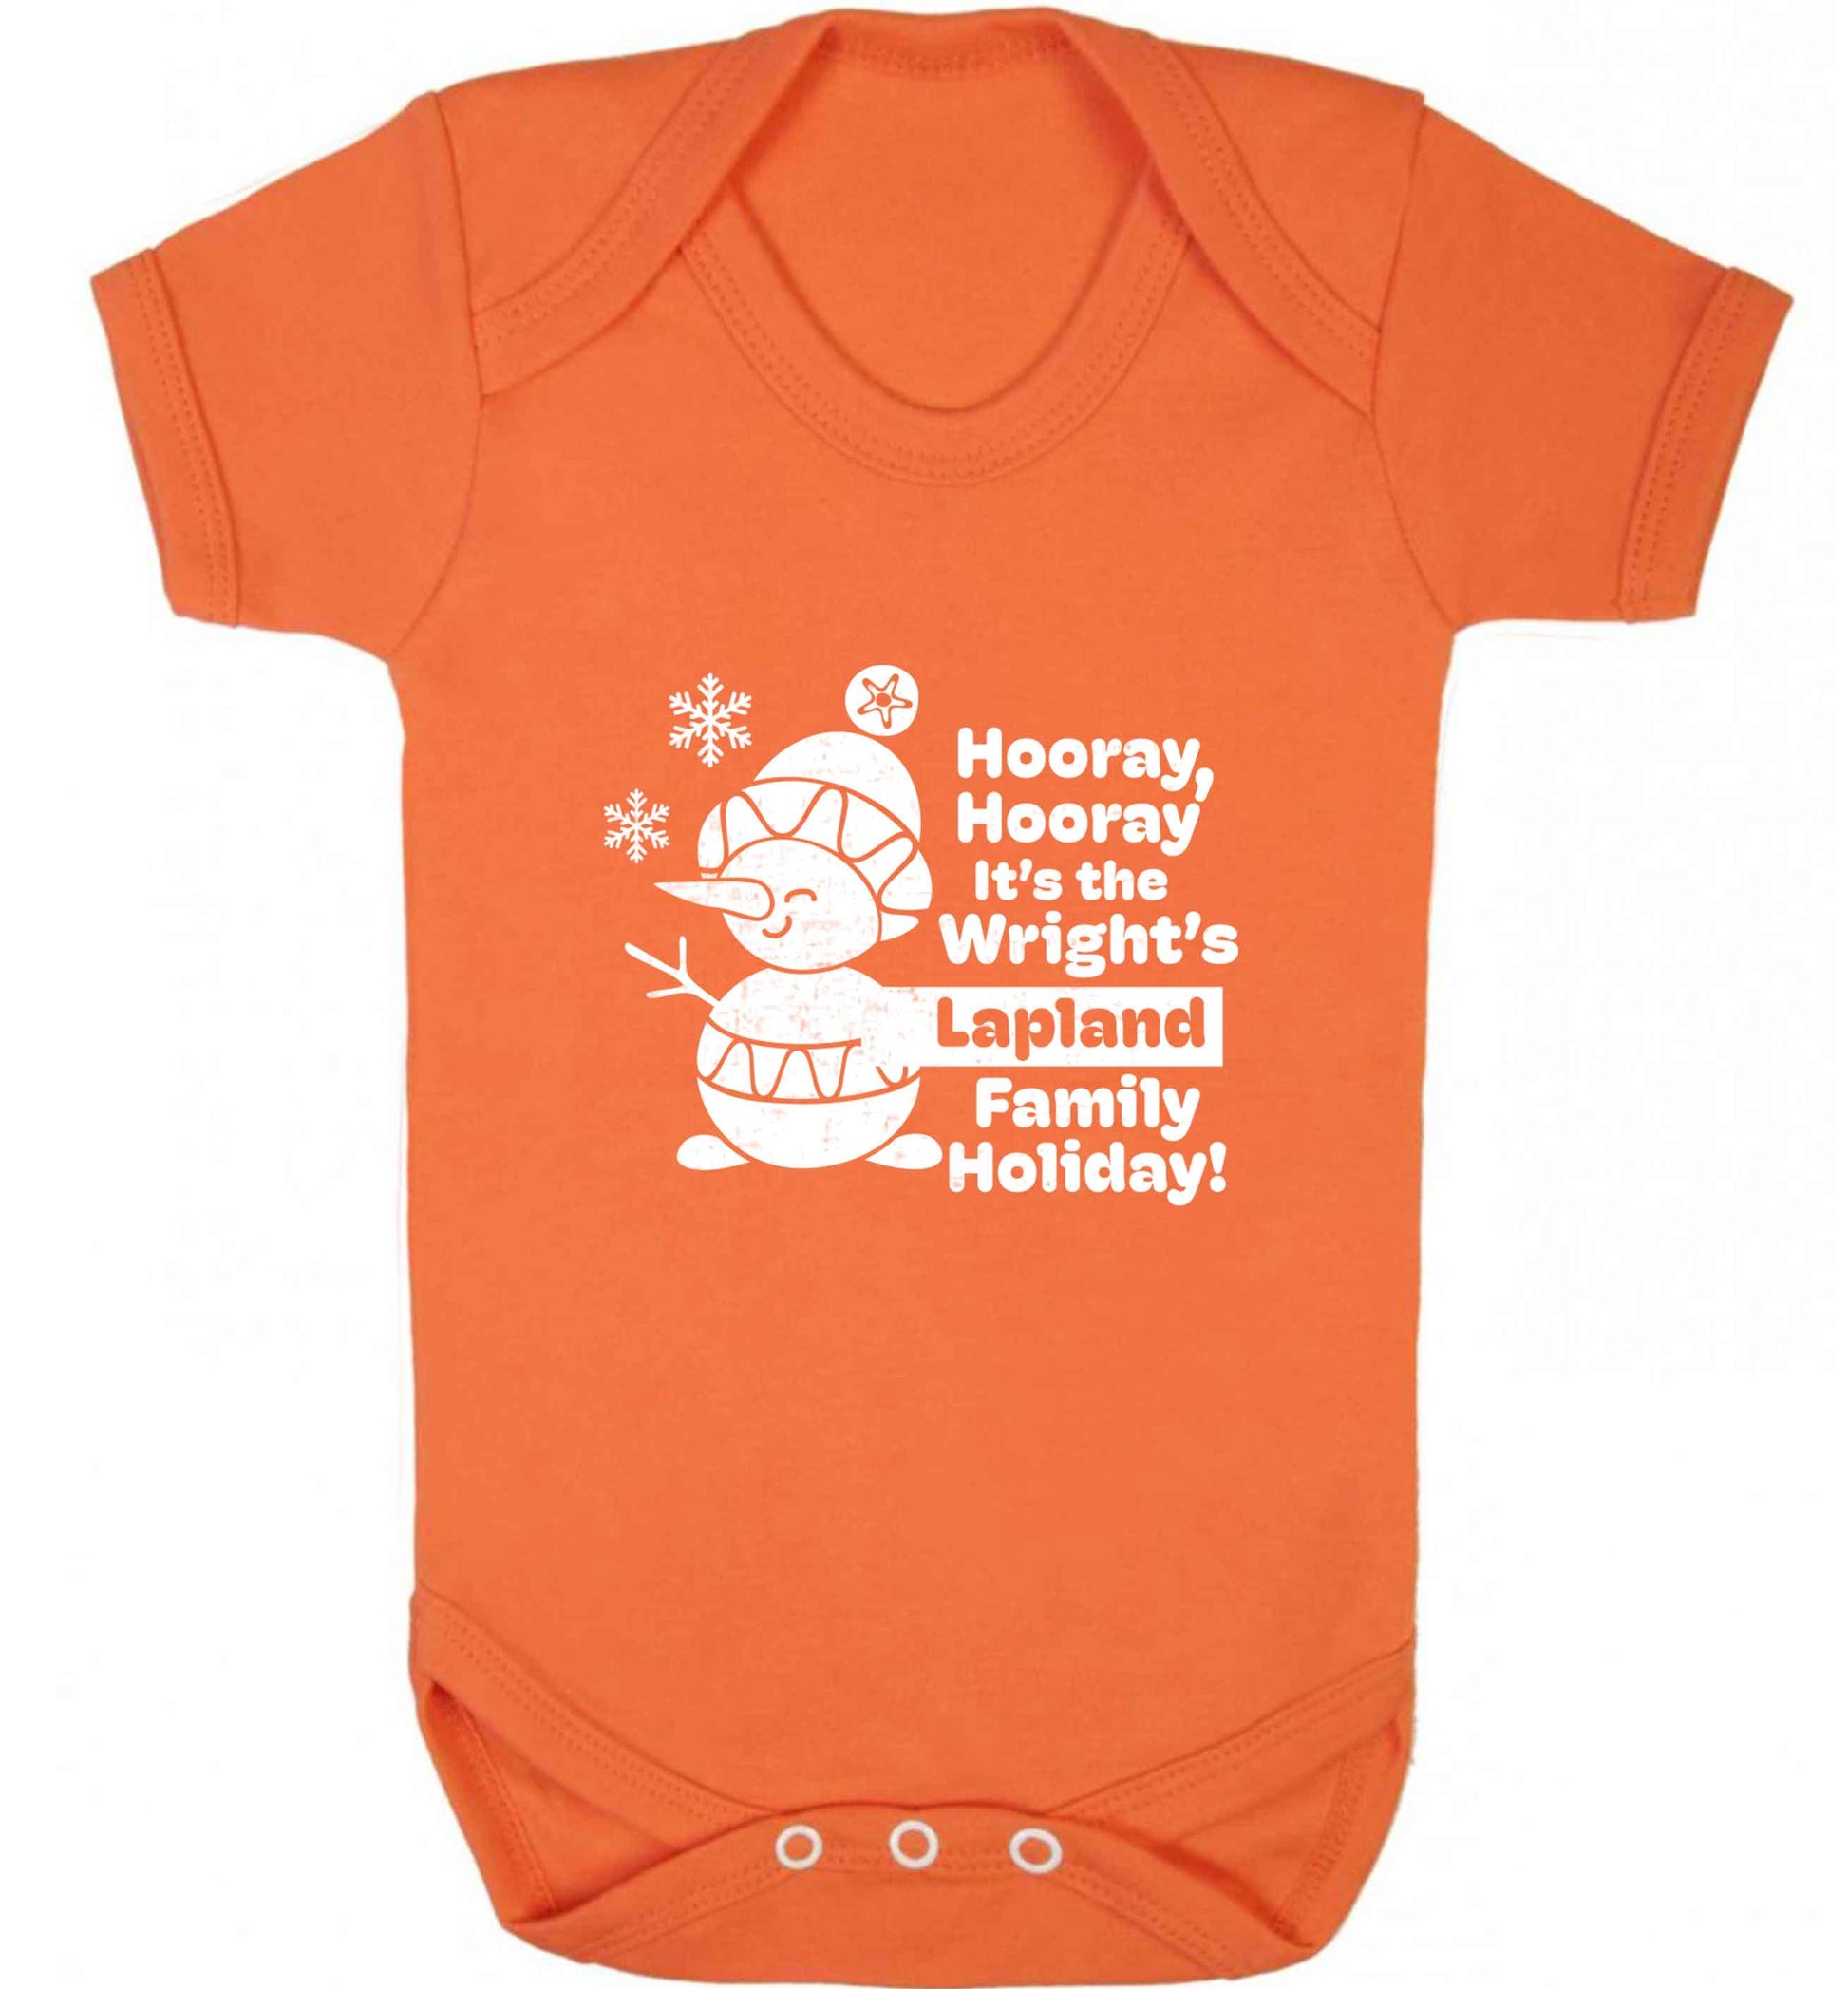 Hooray it's the personalised Lapland holiday! baby vest orange 18-24 months